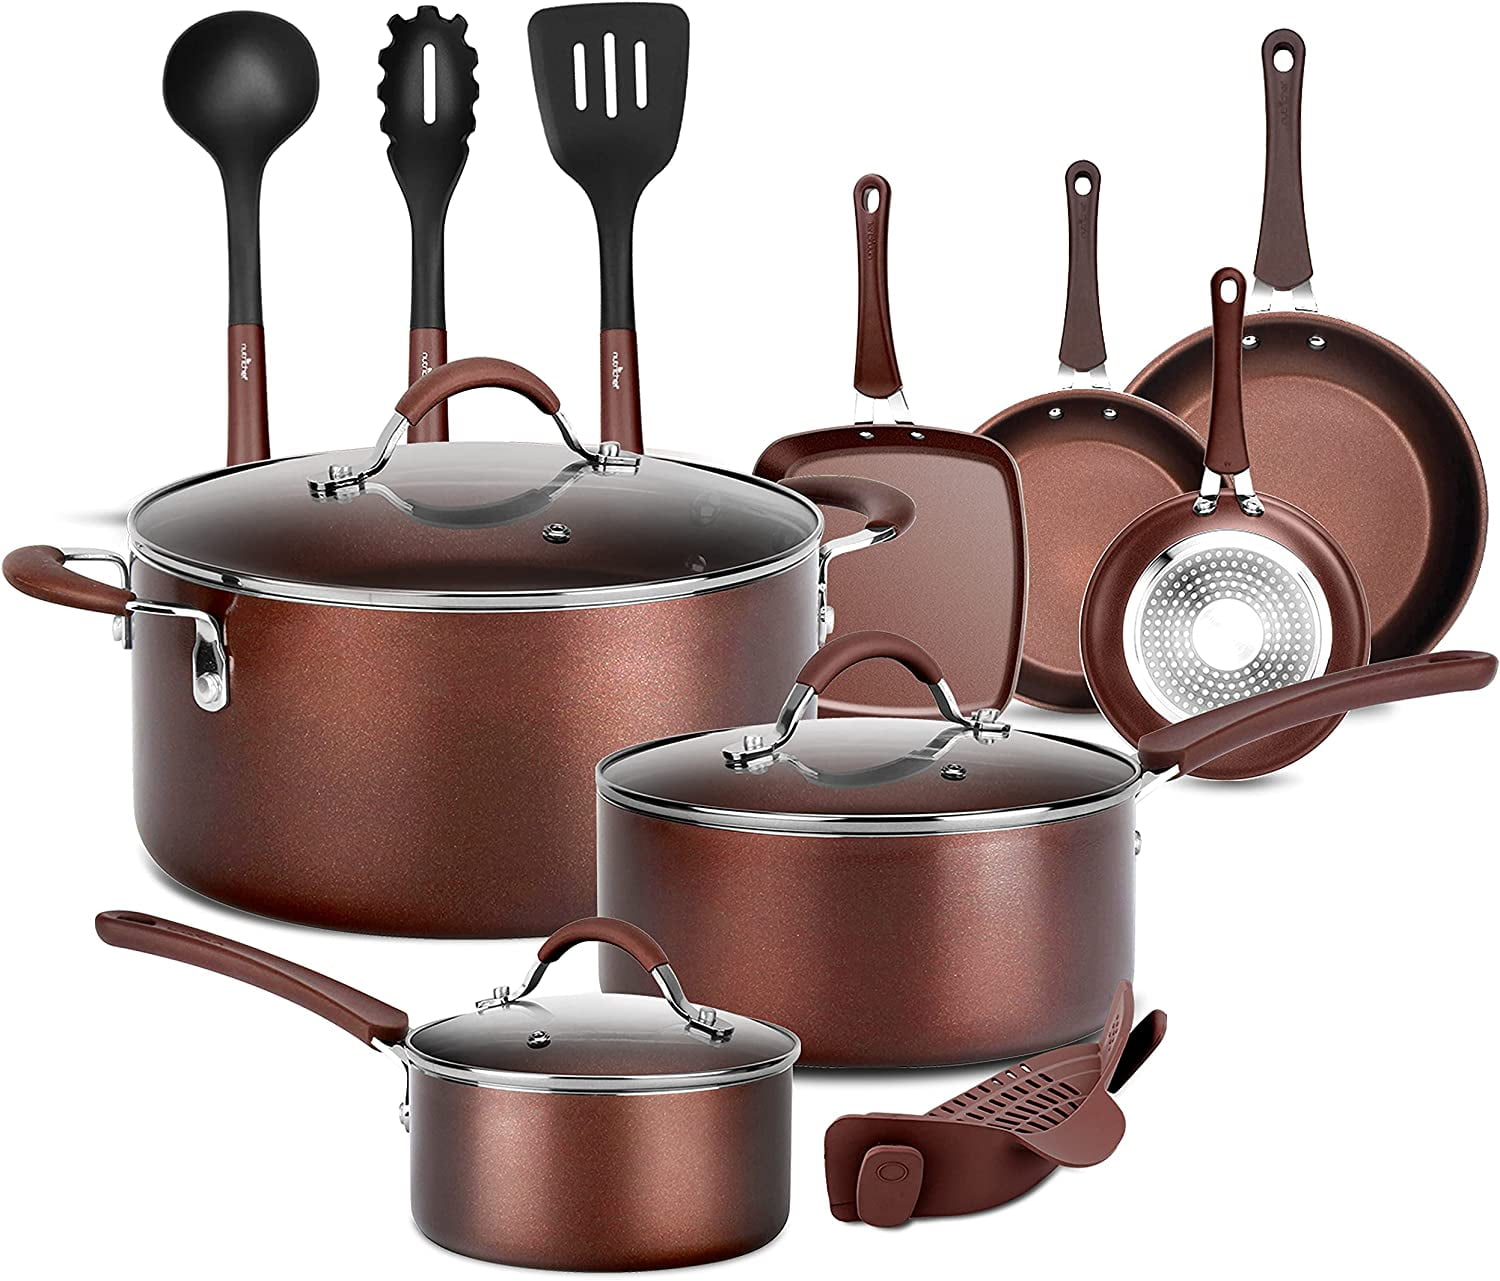 Ceramic Pots and Pans Set Nonstick Cookware Sets Non Toxic Cookware Set,  PFOA Free, Induction Cookware With Dutch Oven, Frying Pan, Saucepan, Sauté  Pan, Luxe Gold Pots and Pans for Cooking Set